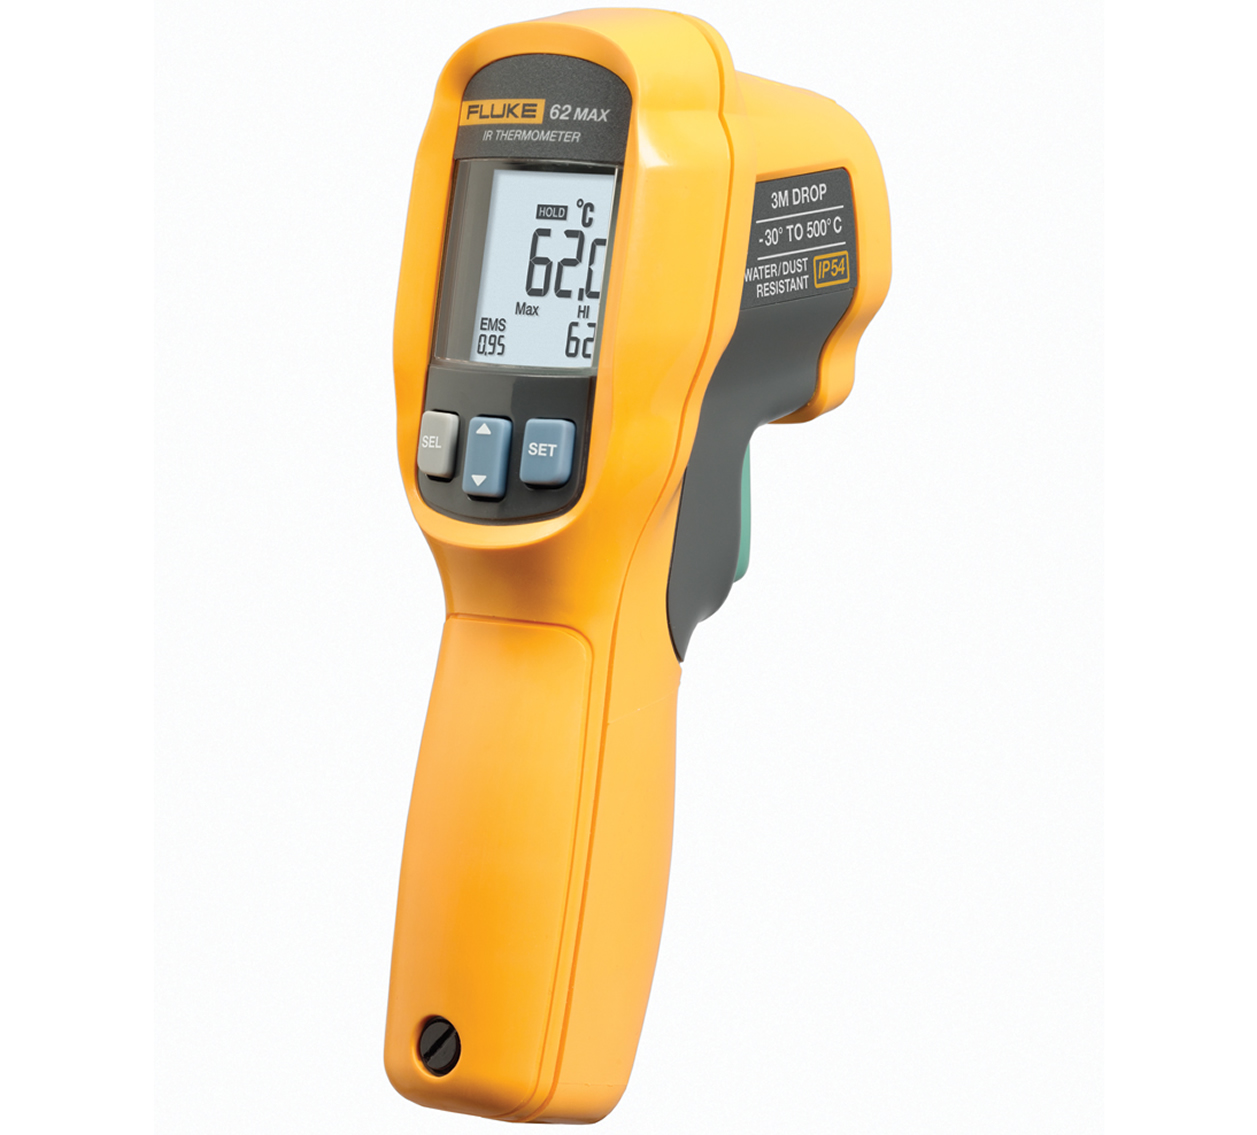 New Fluke infrared thermometers offer market-leading dust, moisture and drop protection